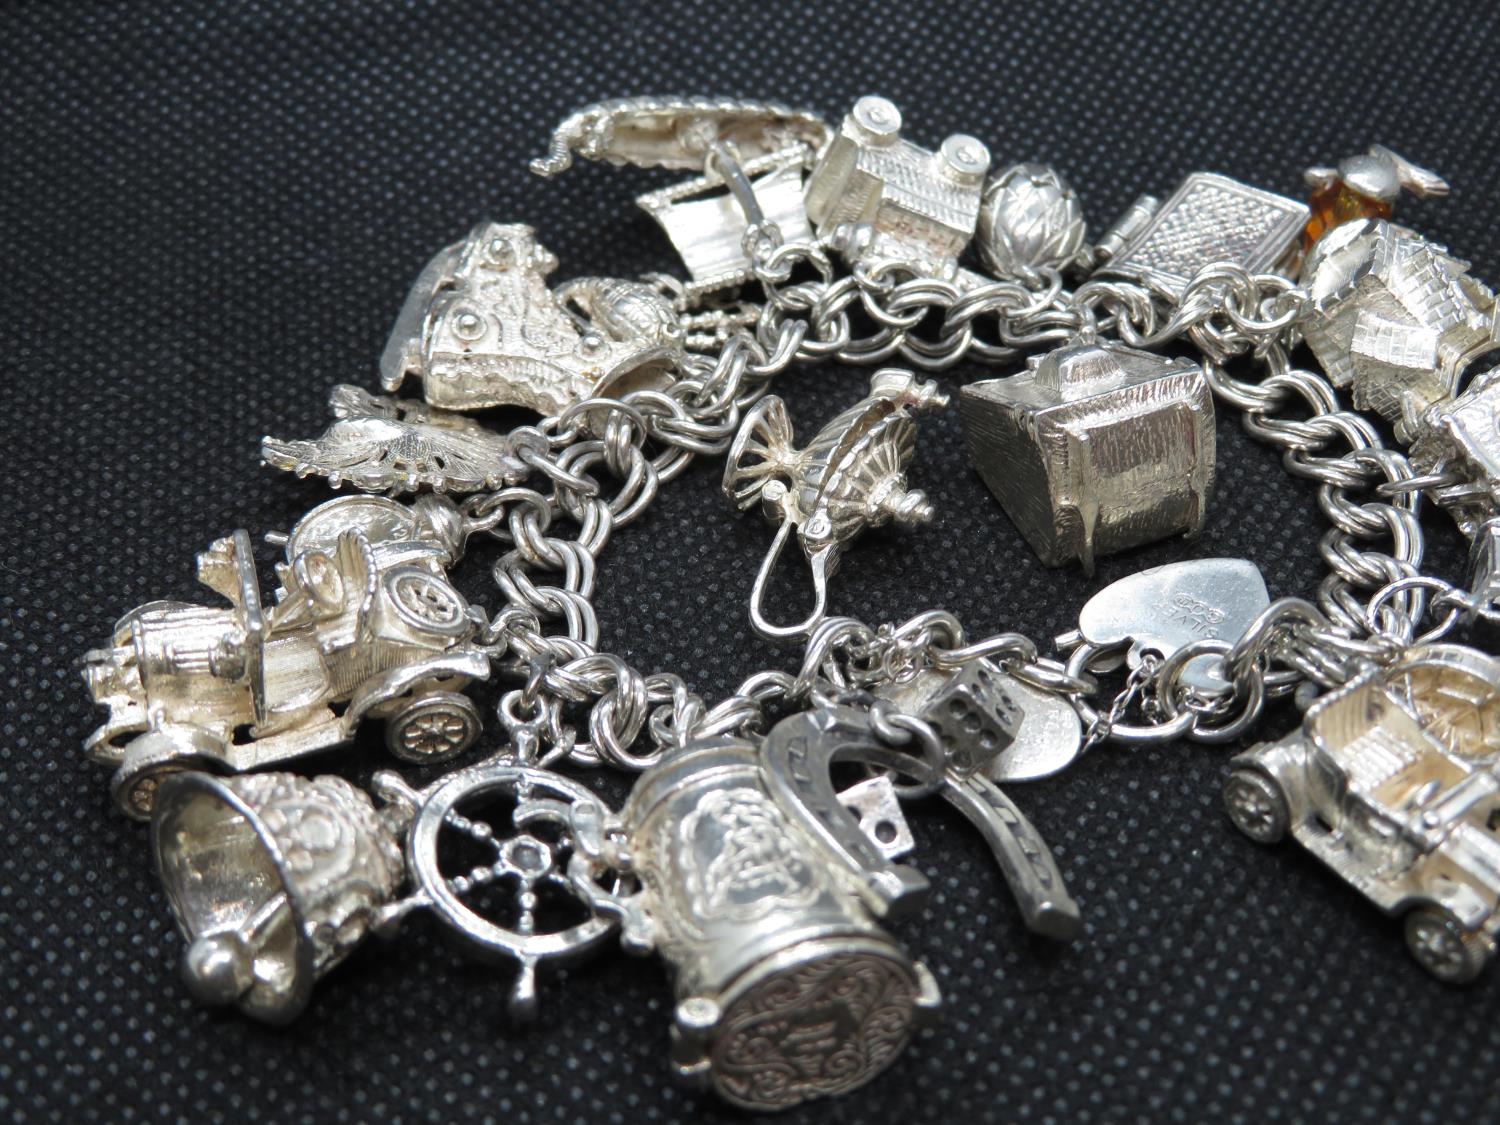 George Jensen vintage silver bracelet with 21 unusual and rare charms GJ Ltd. HM London 1972 116.4g - Image 2 of 2